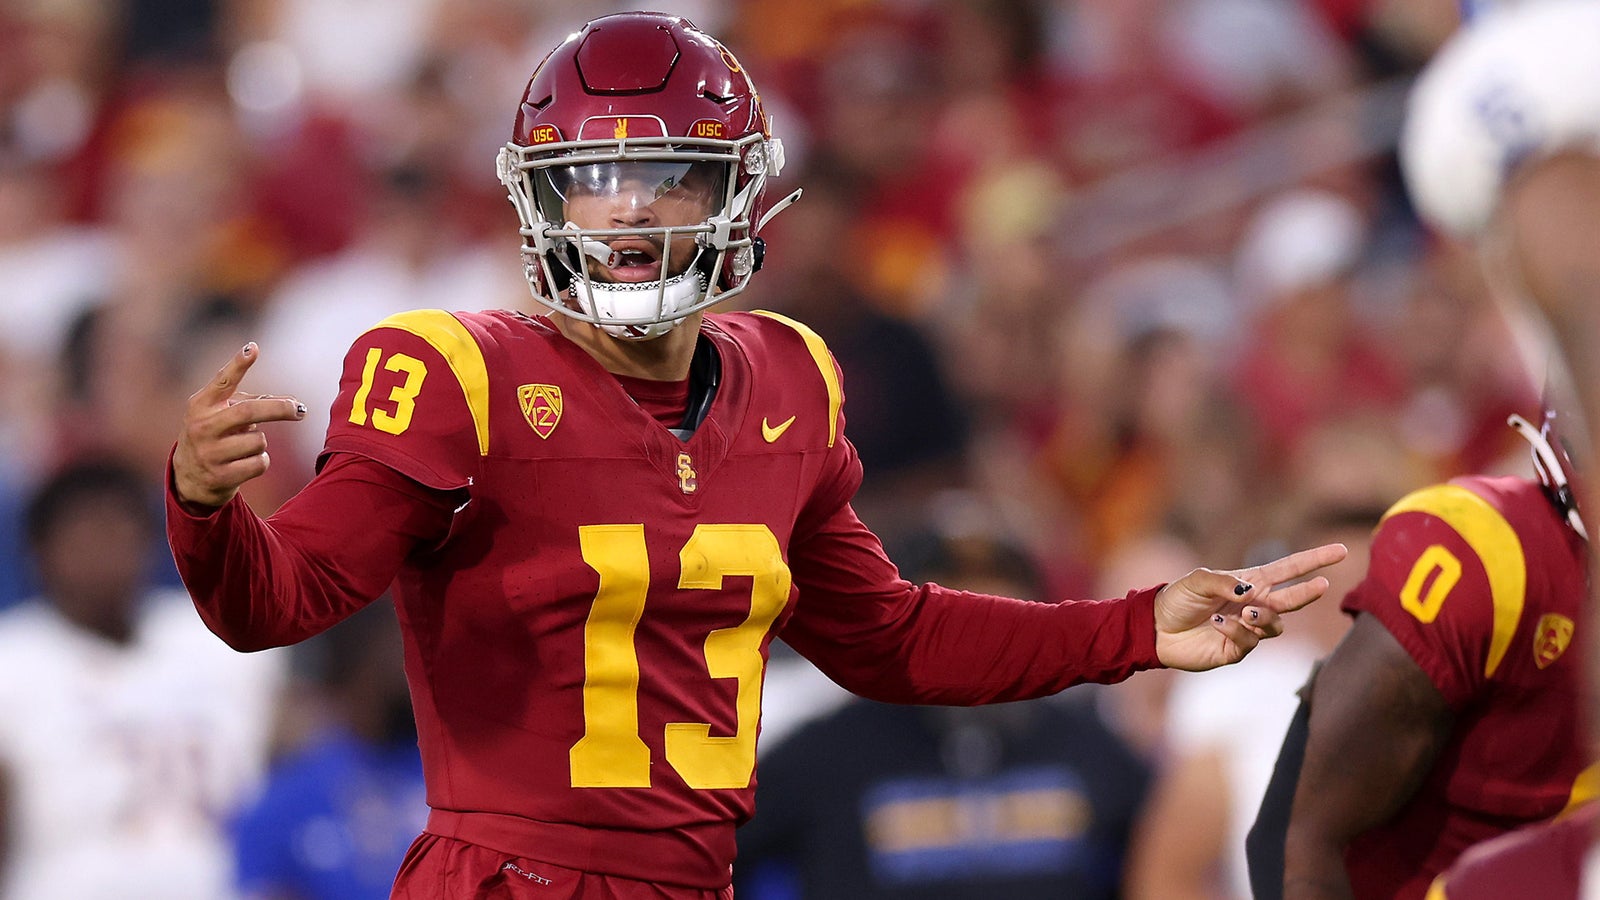 Can USC's Caleb Williams repeat as Heisman? And teams better than advertised